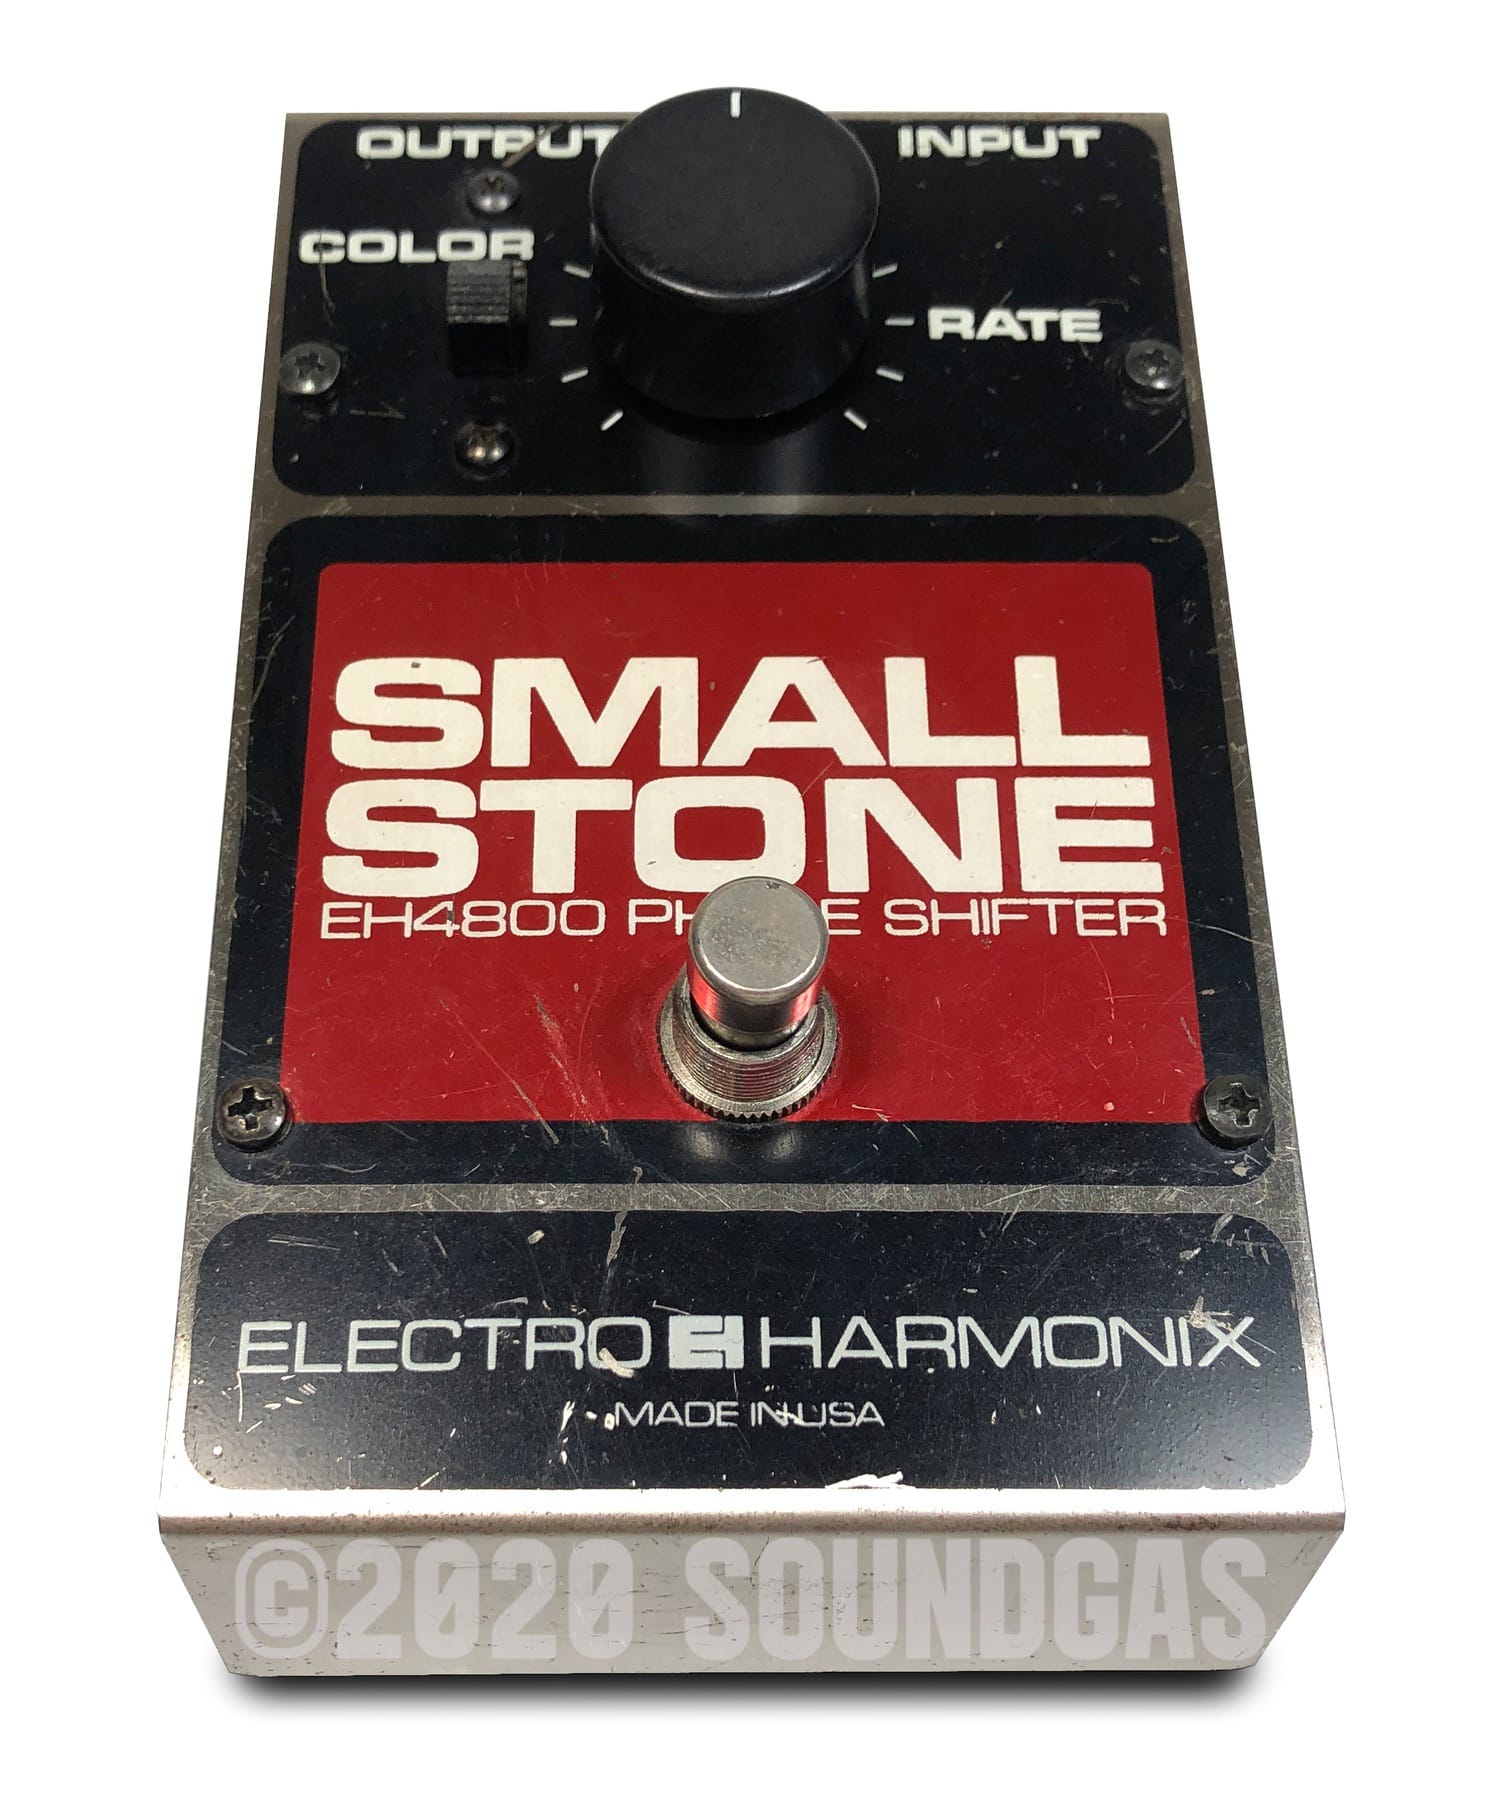 Electro-Harmonix Small Stone V3 - Vintage guitar effect pedal FOR SALE